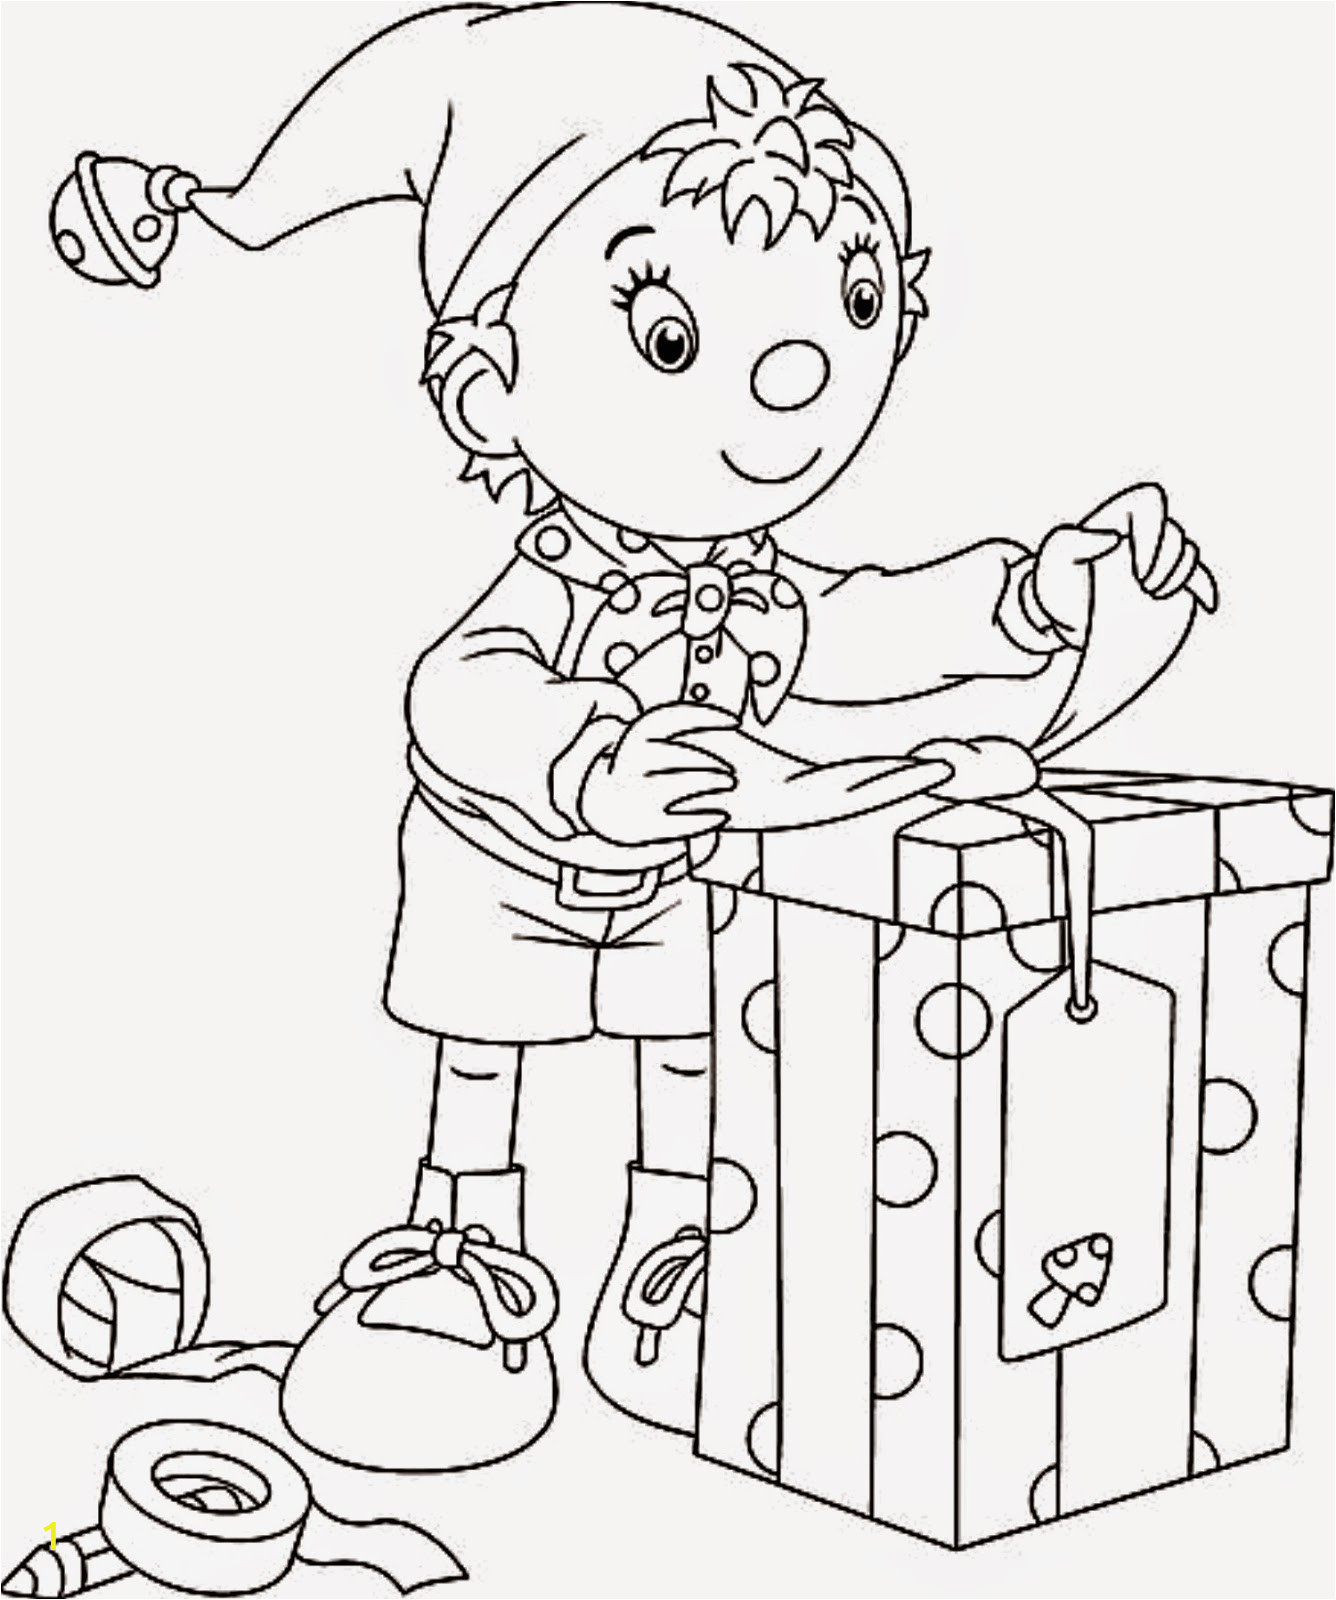 Buddy the Elf Movie Coloring Pages Elf Movie Coloring Pages Neo Coloring